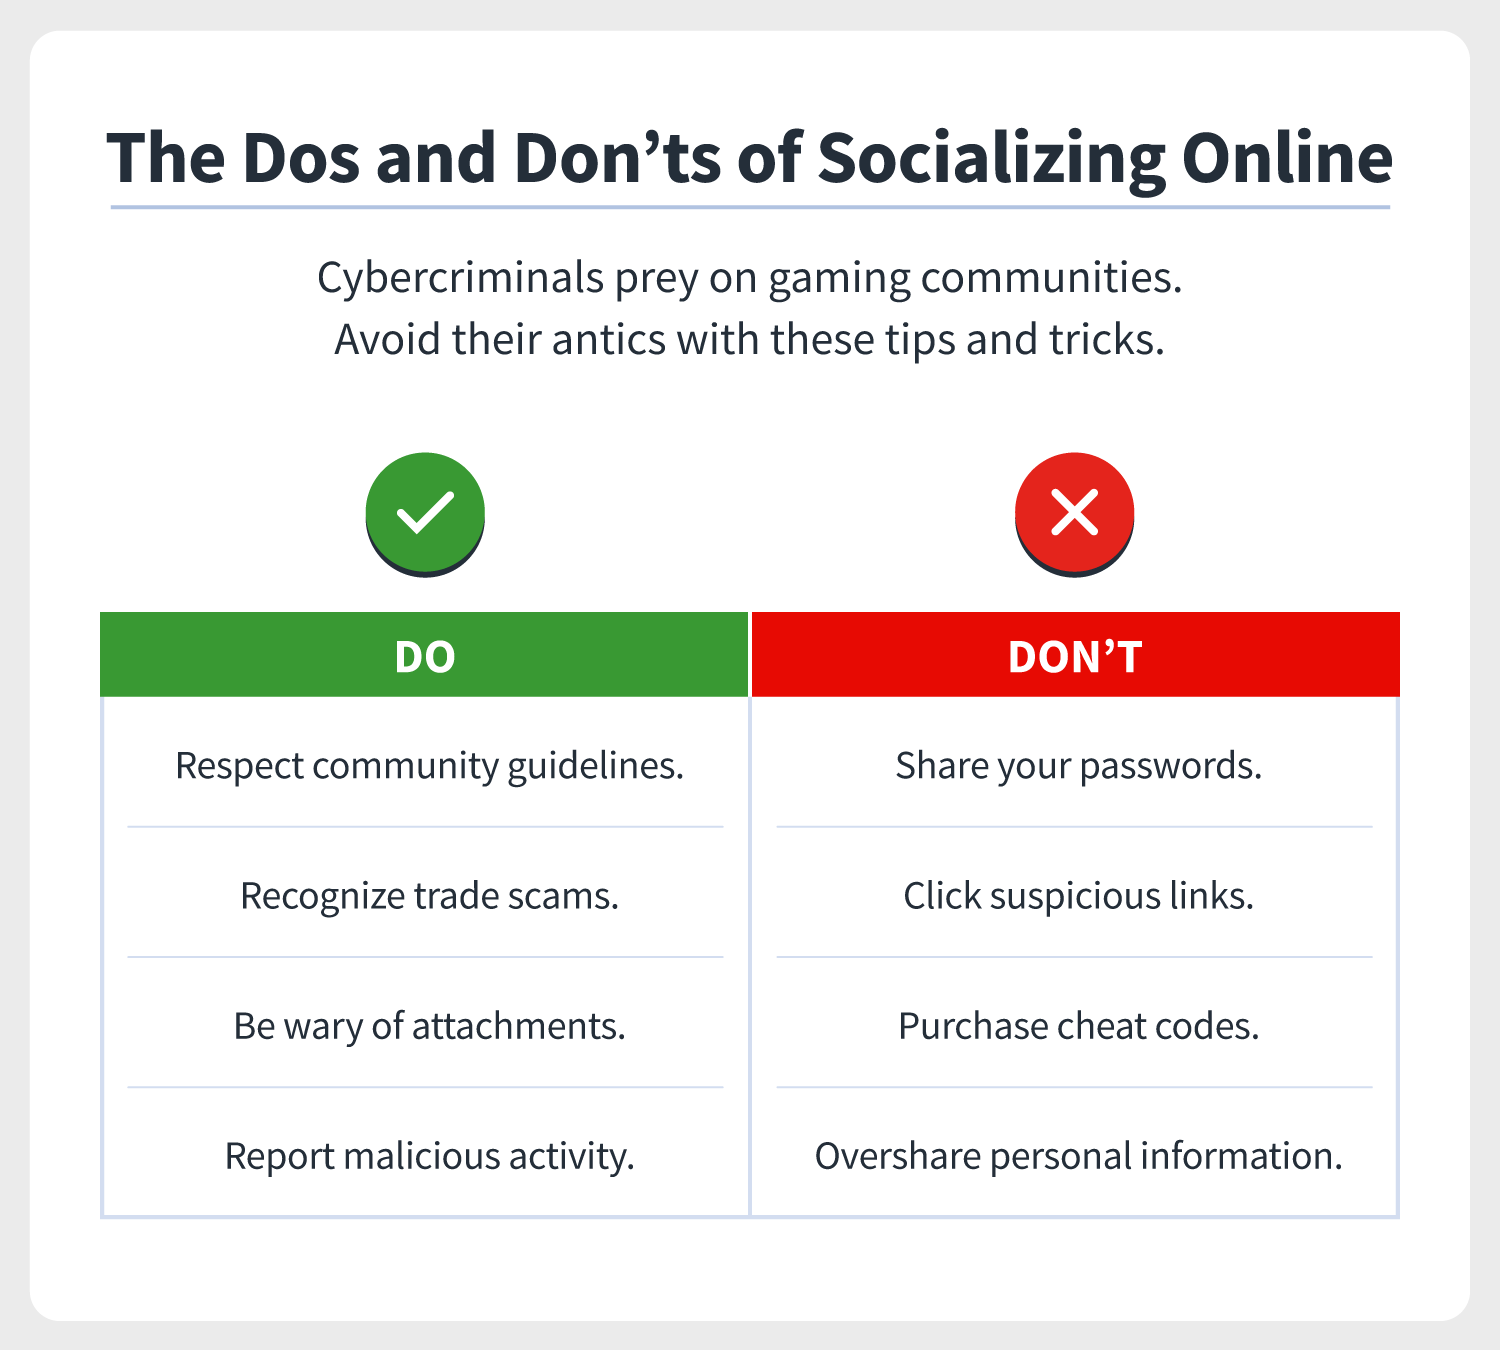 a checklist overview the dos and don’ts of socializing online, especially in gaming communities 